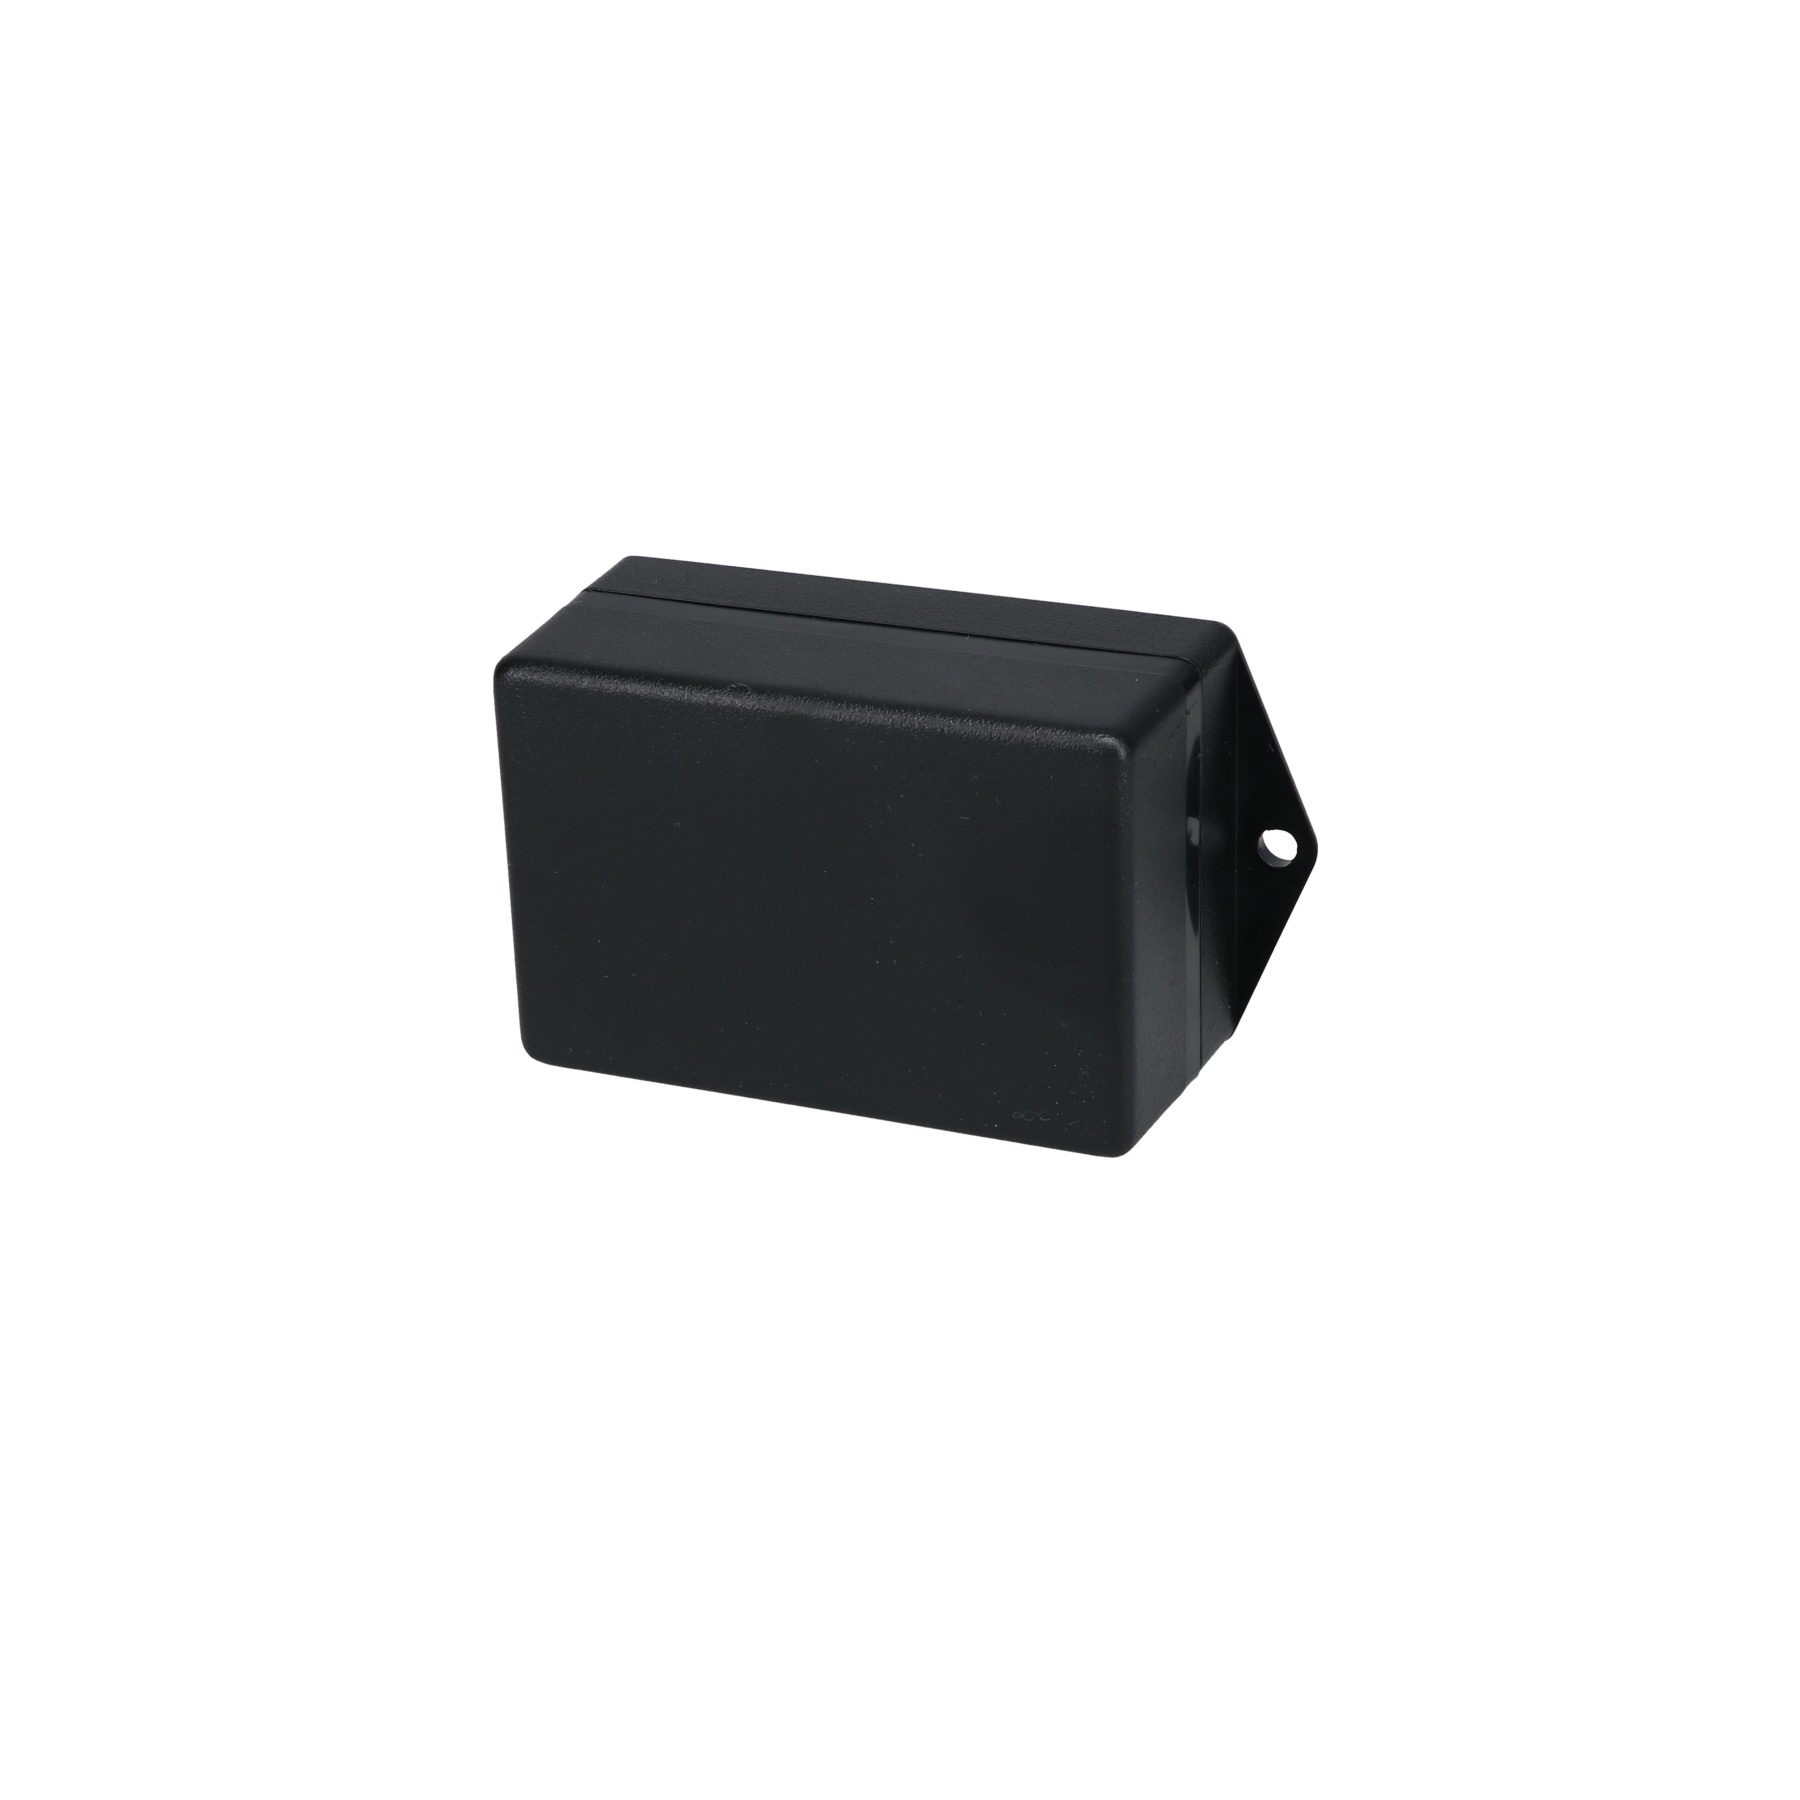 Utilibox Style H Plastic Utility Box with Mounting Flanges CU-1470-MB